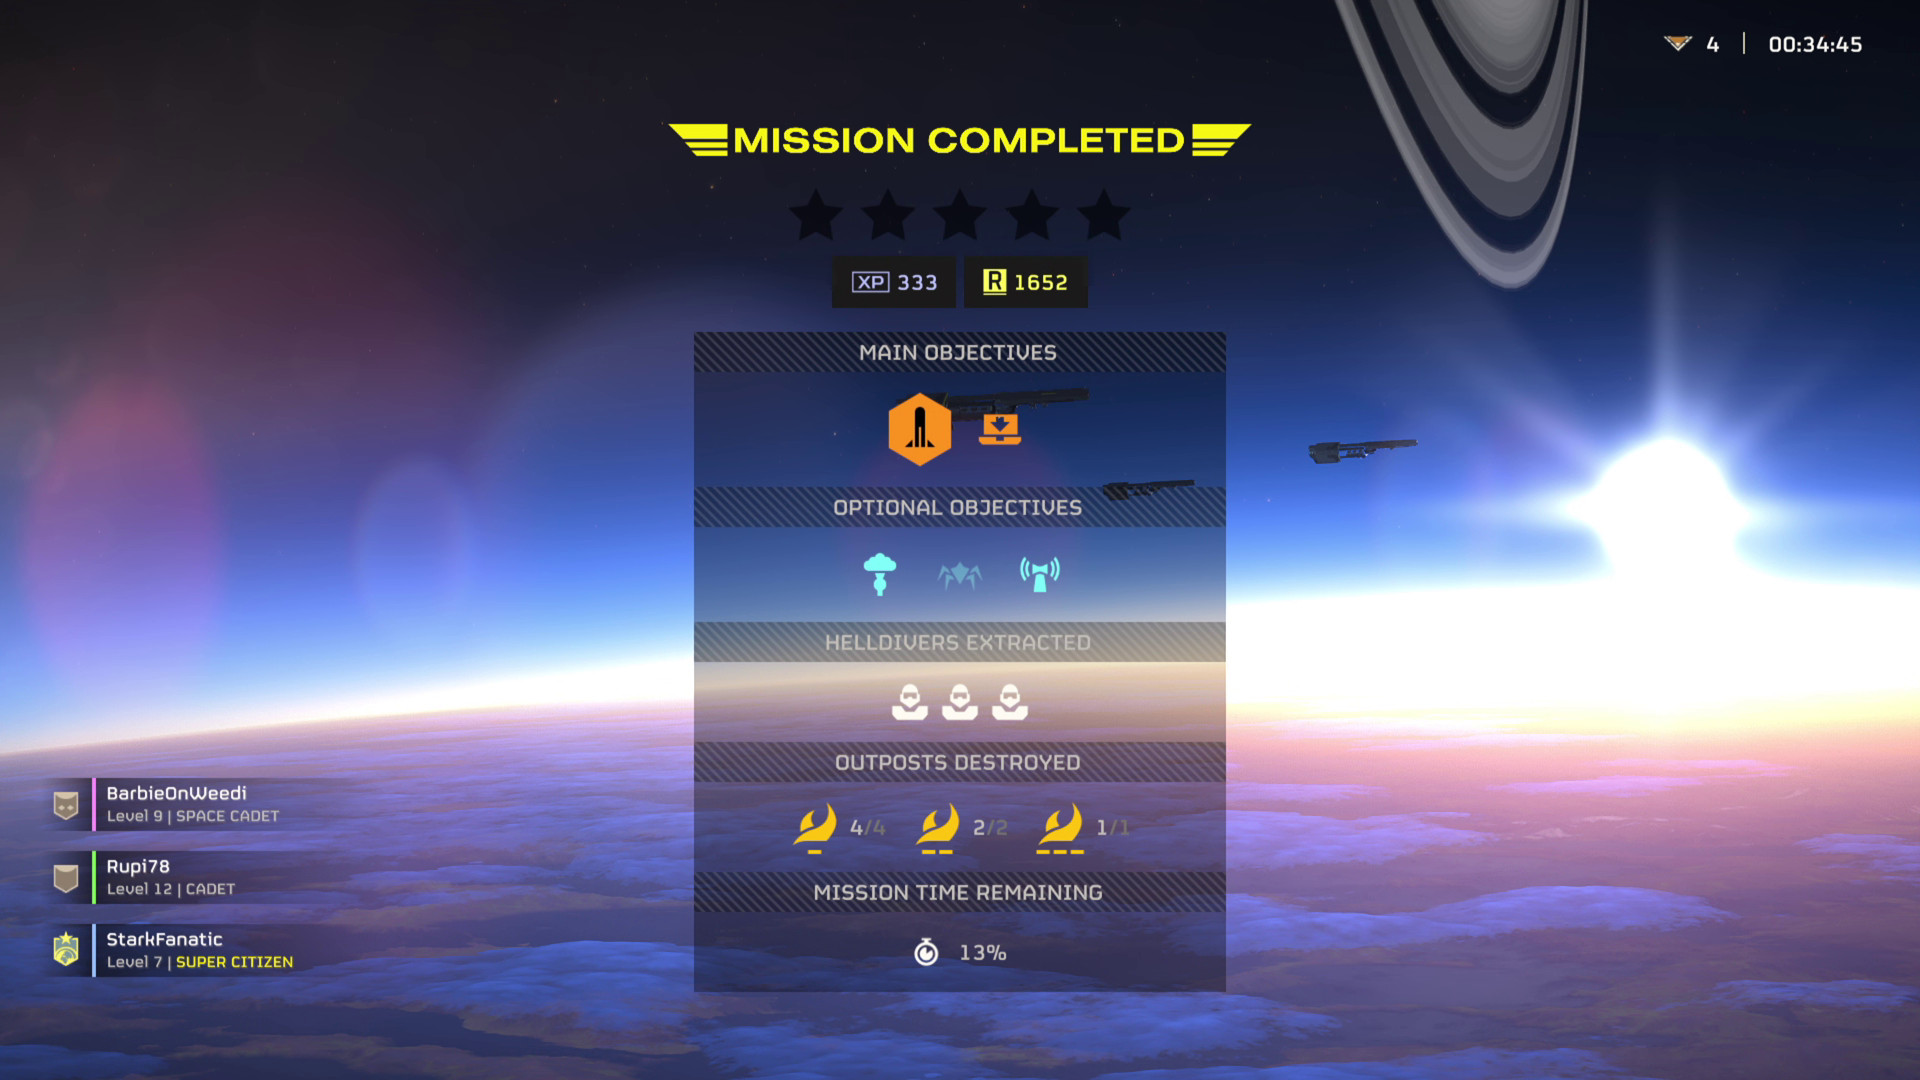 Mission complete screen